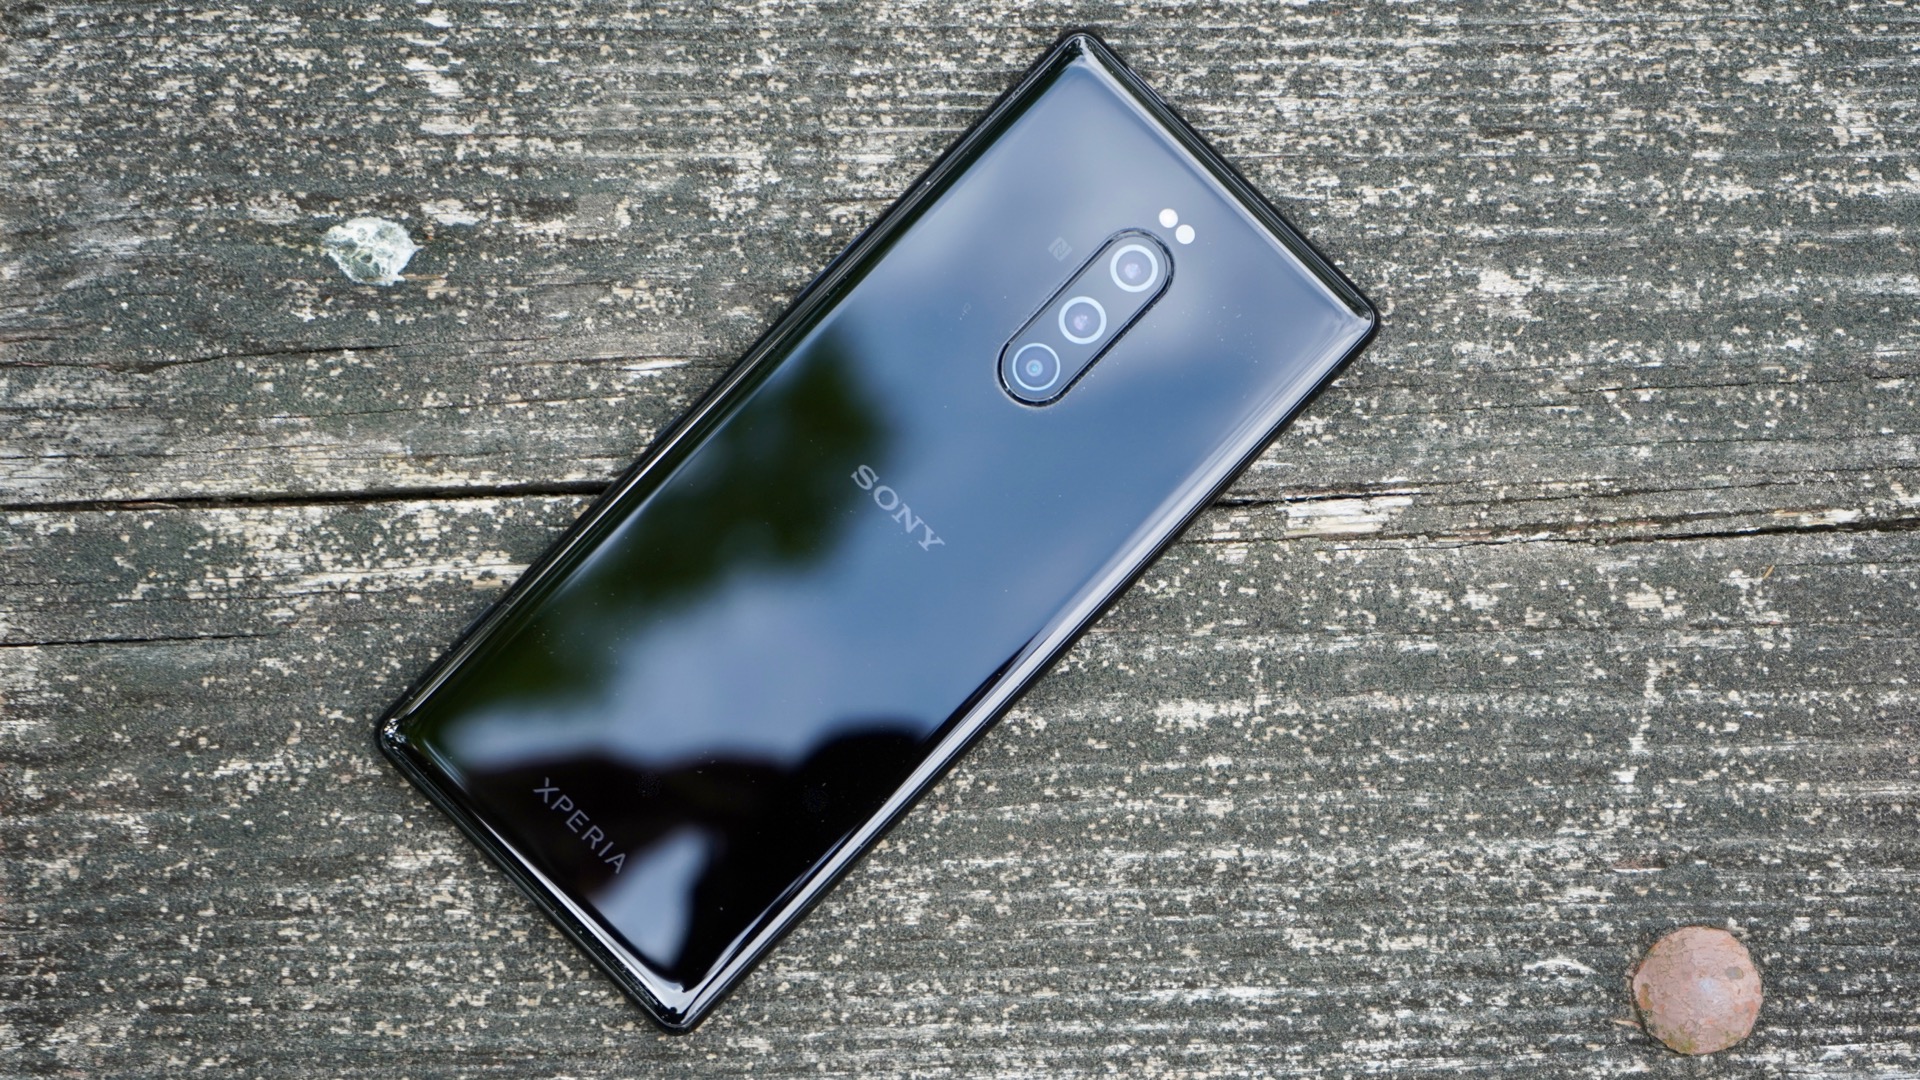 LG and Sony's smartphone sales continue to tank.